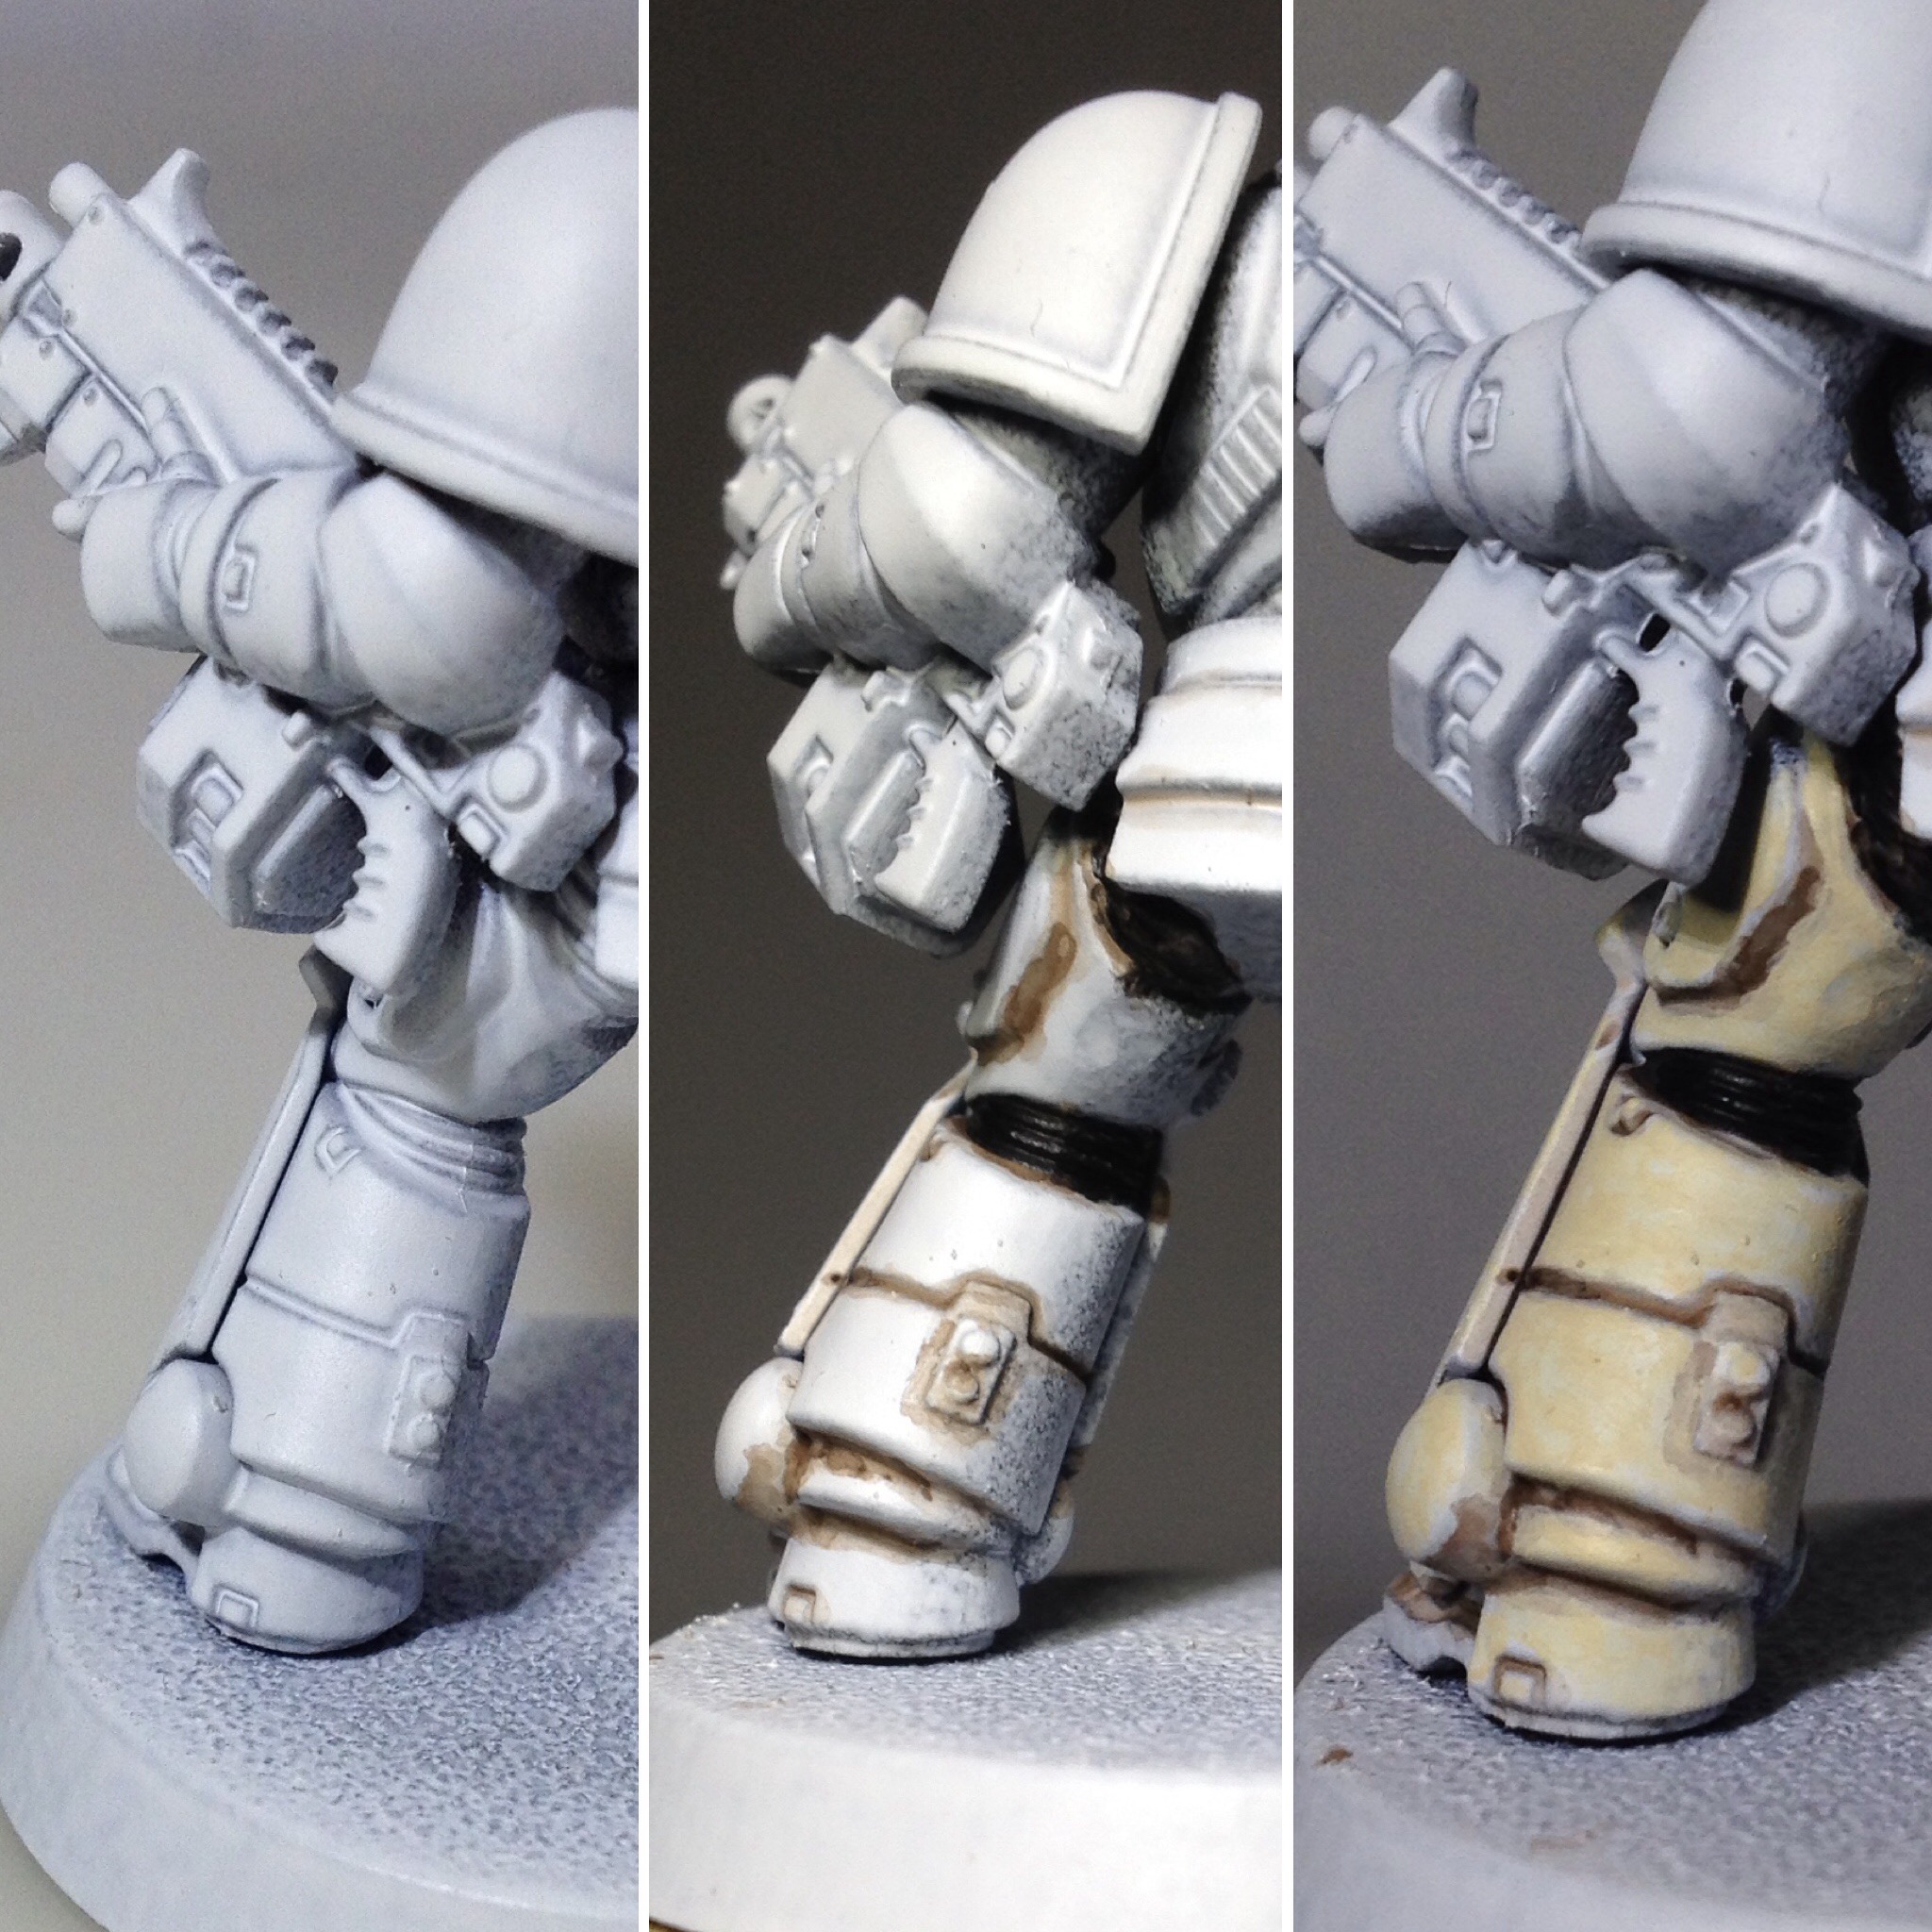 Custom Chapter Shoulder Pauldron Hard Transfers for Space Marines by Hunting Heresy